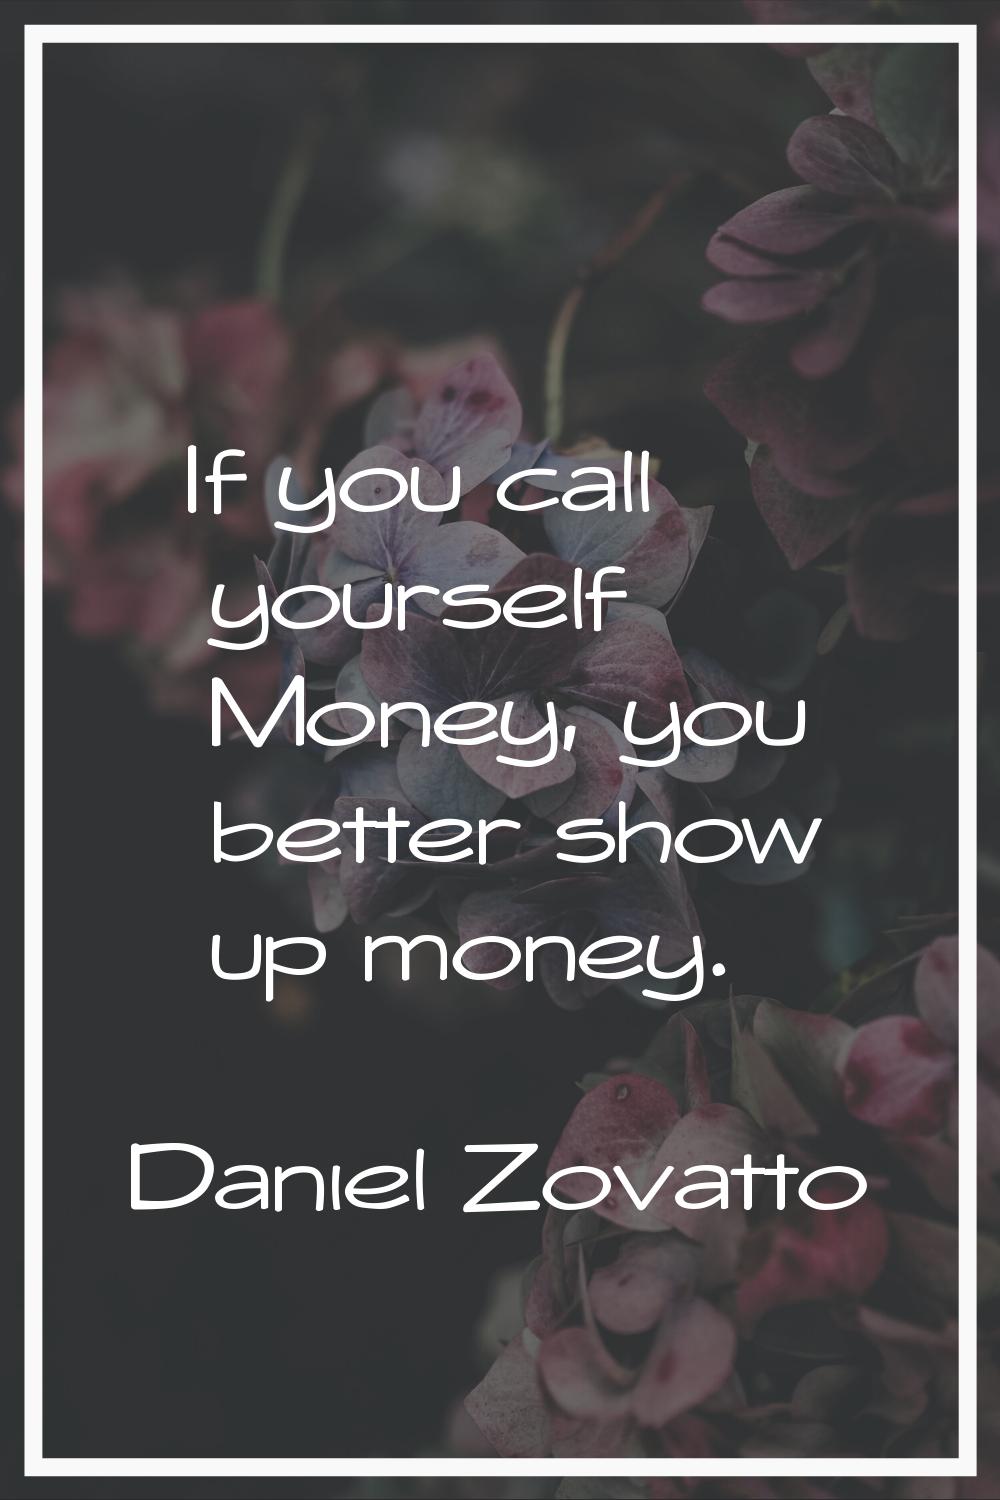 If you call yourself Money, you better show up money.